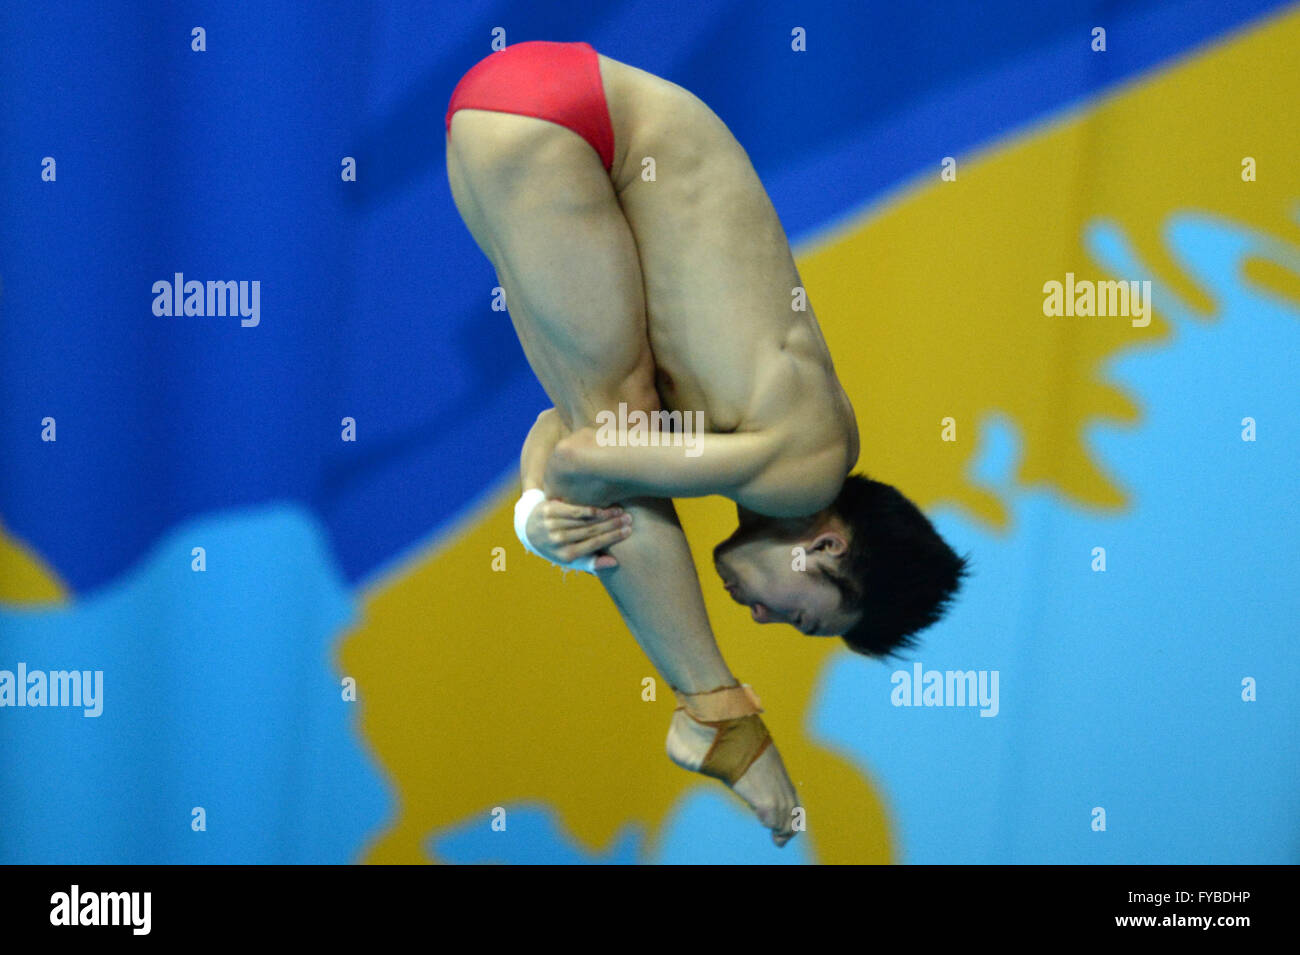 Kazan, Russia. 24th Apr, 2016. Chen Aisen of China competes during the men's 10m platform final at FINA/ NVC diving world series in Kazan, Russia, April 24, 2016. Credit:  Pavel Bednyakov/Xinhua/Alamy Live News Stock Photo